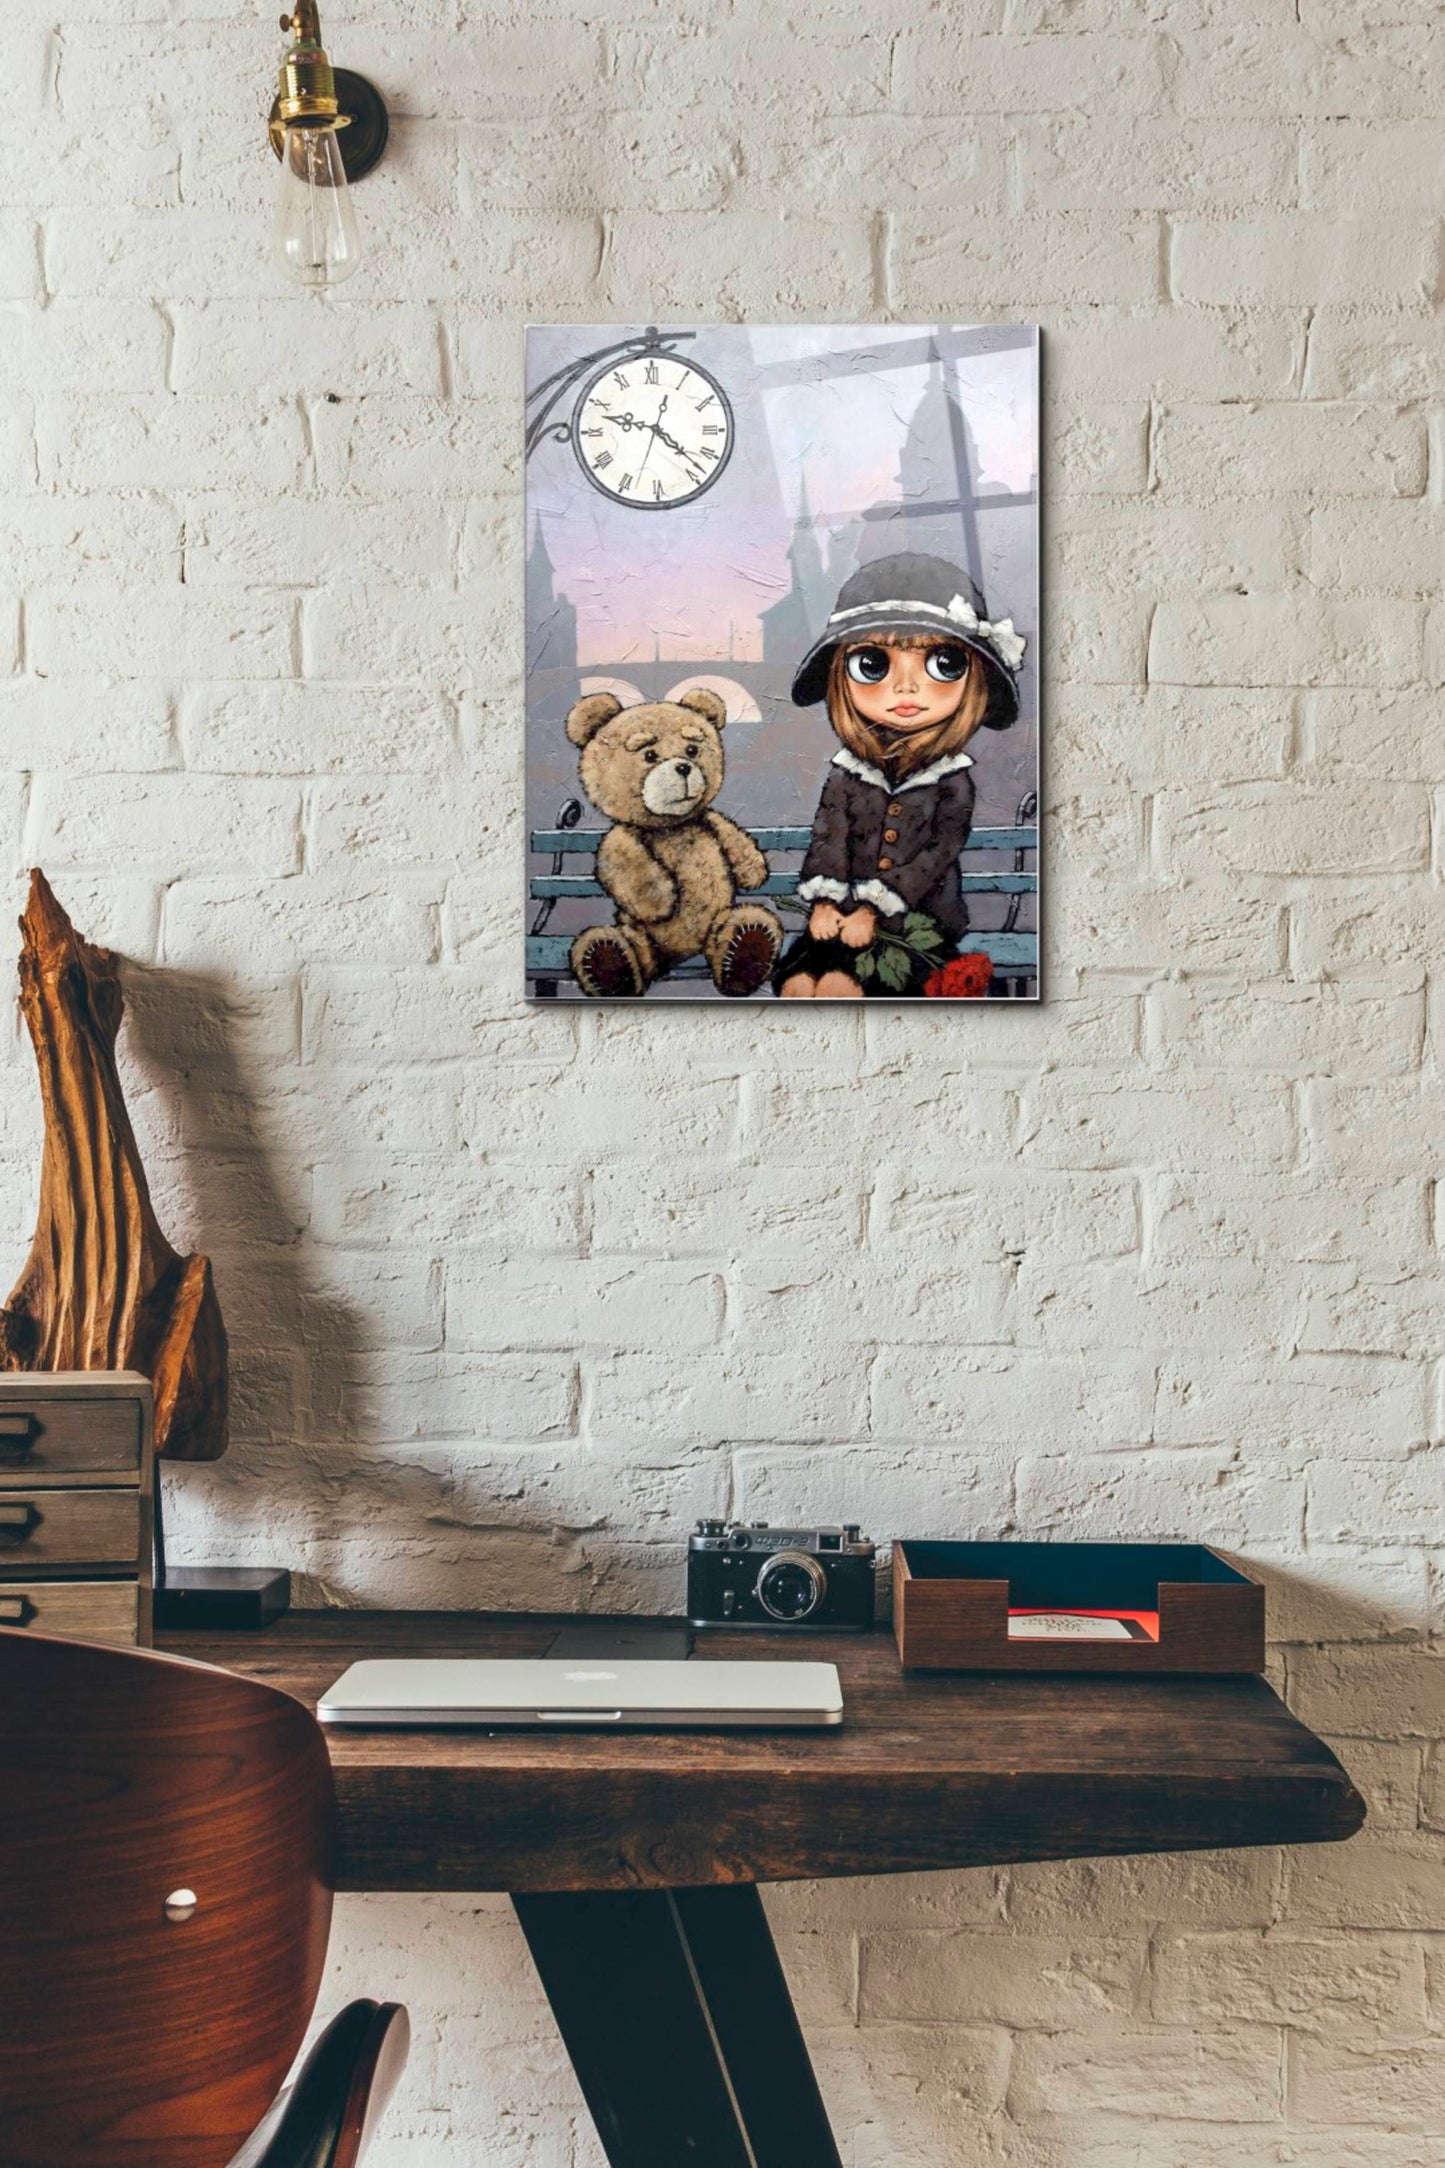 Epic Art 'Appointment with Bear' by Alexander Gunin, Acrylic Glass Wall Art,12x16